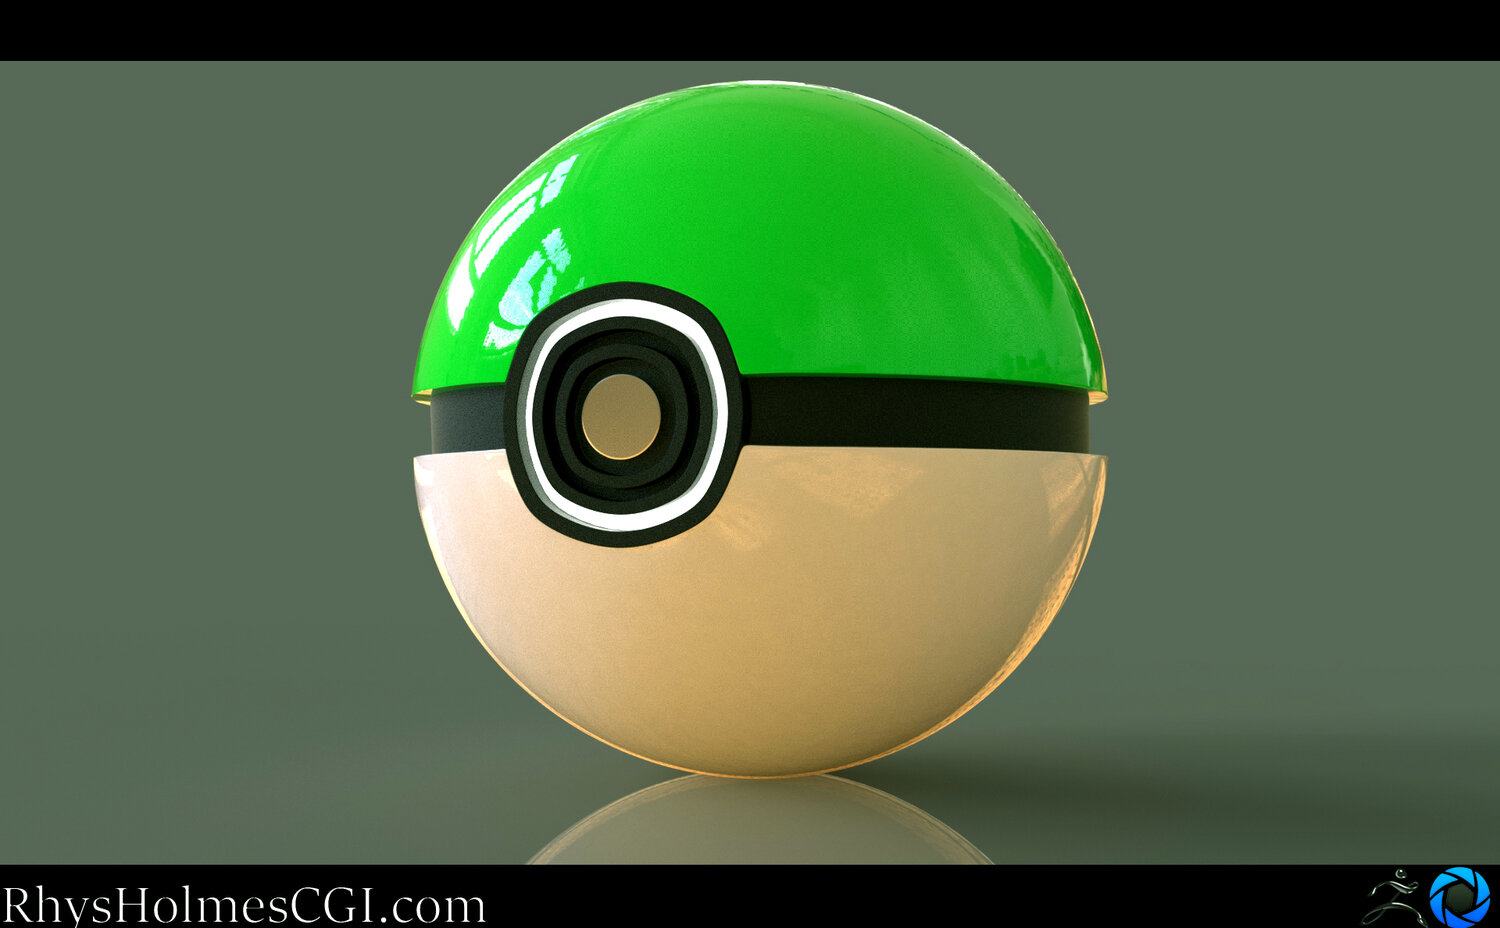 Model+2_Pokeball-Green_LED+On_With+Template.jpg